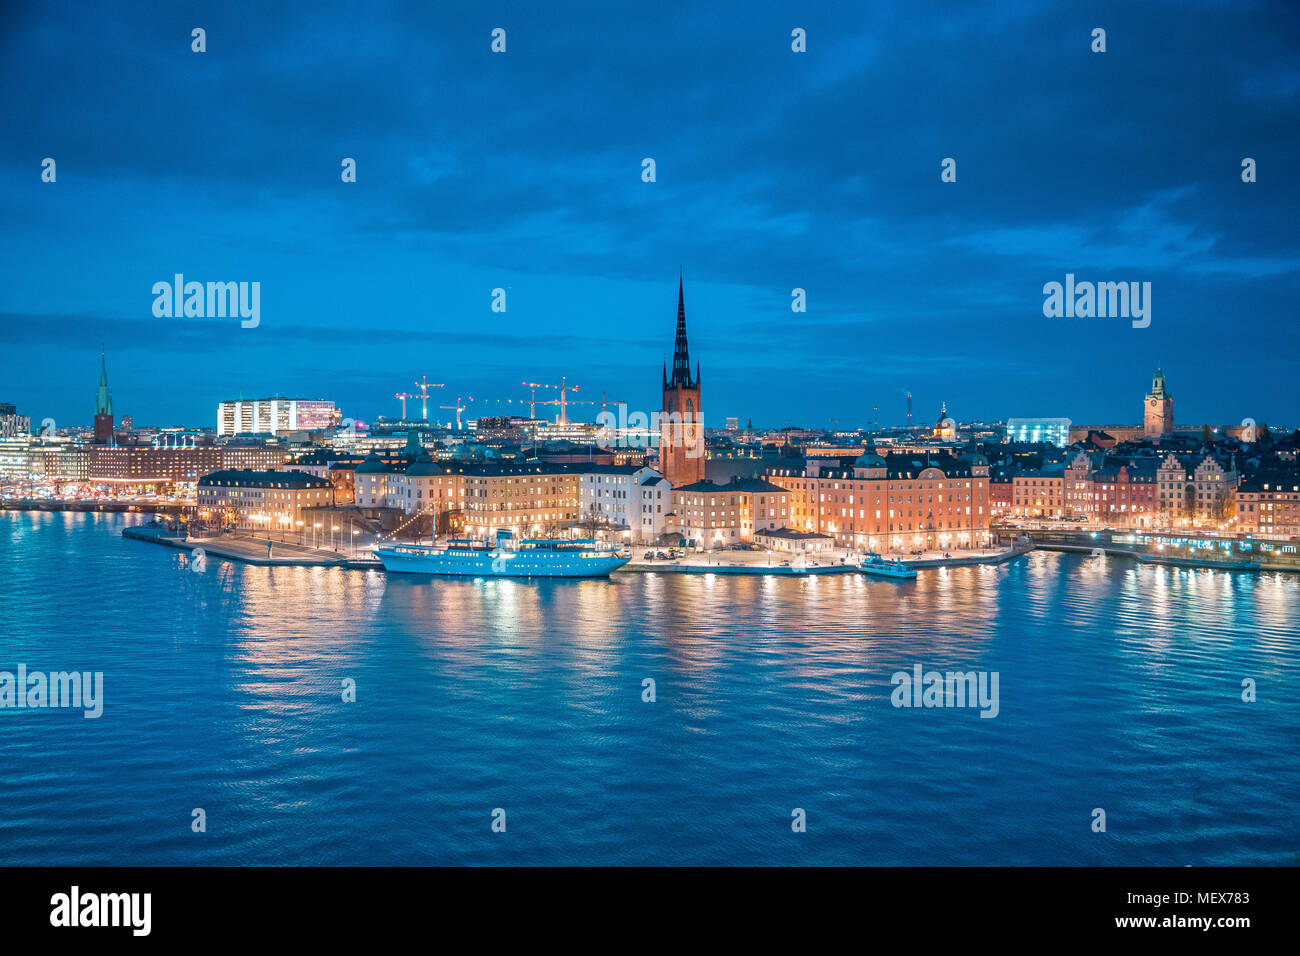 Panoramic view of famous Stockholm city center with historic Riddarholmen in Gamla Stan old town district during blue hour at dusk Stock Photo